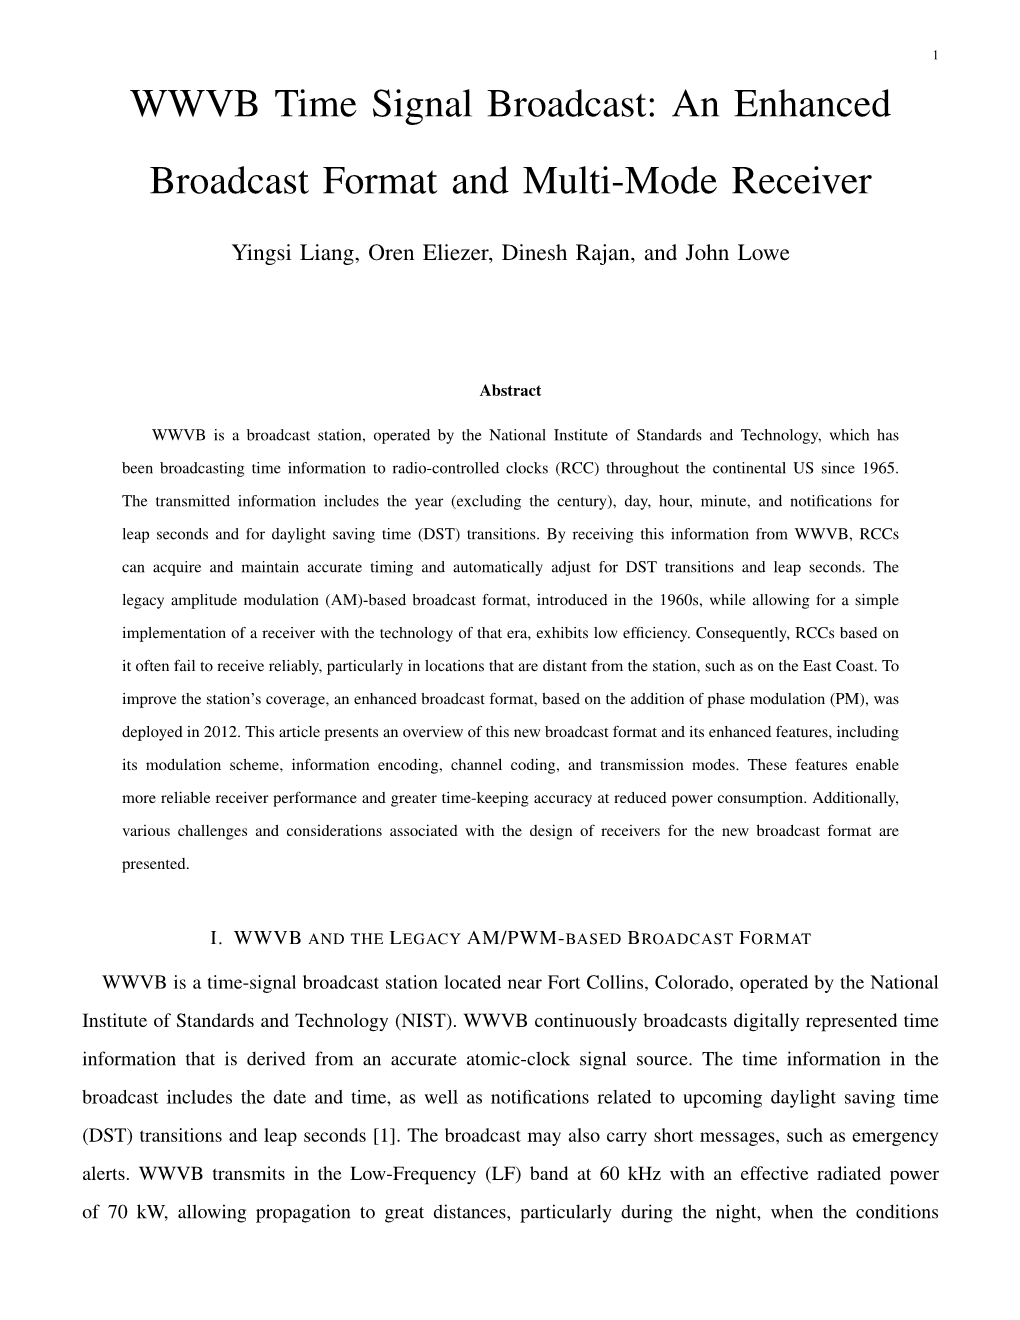 An Enhanced Broadcast Format and Multi-Mode Receiver